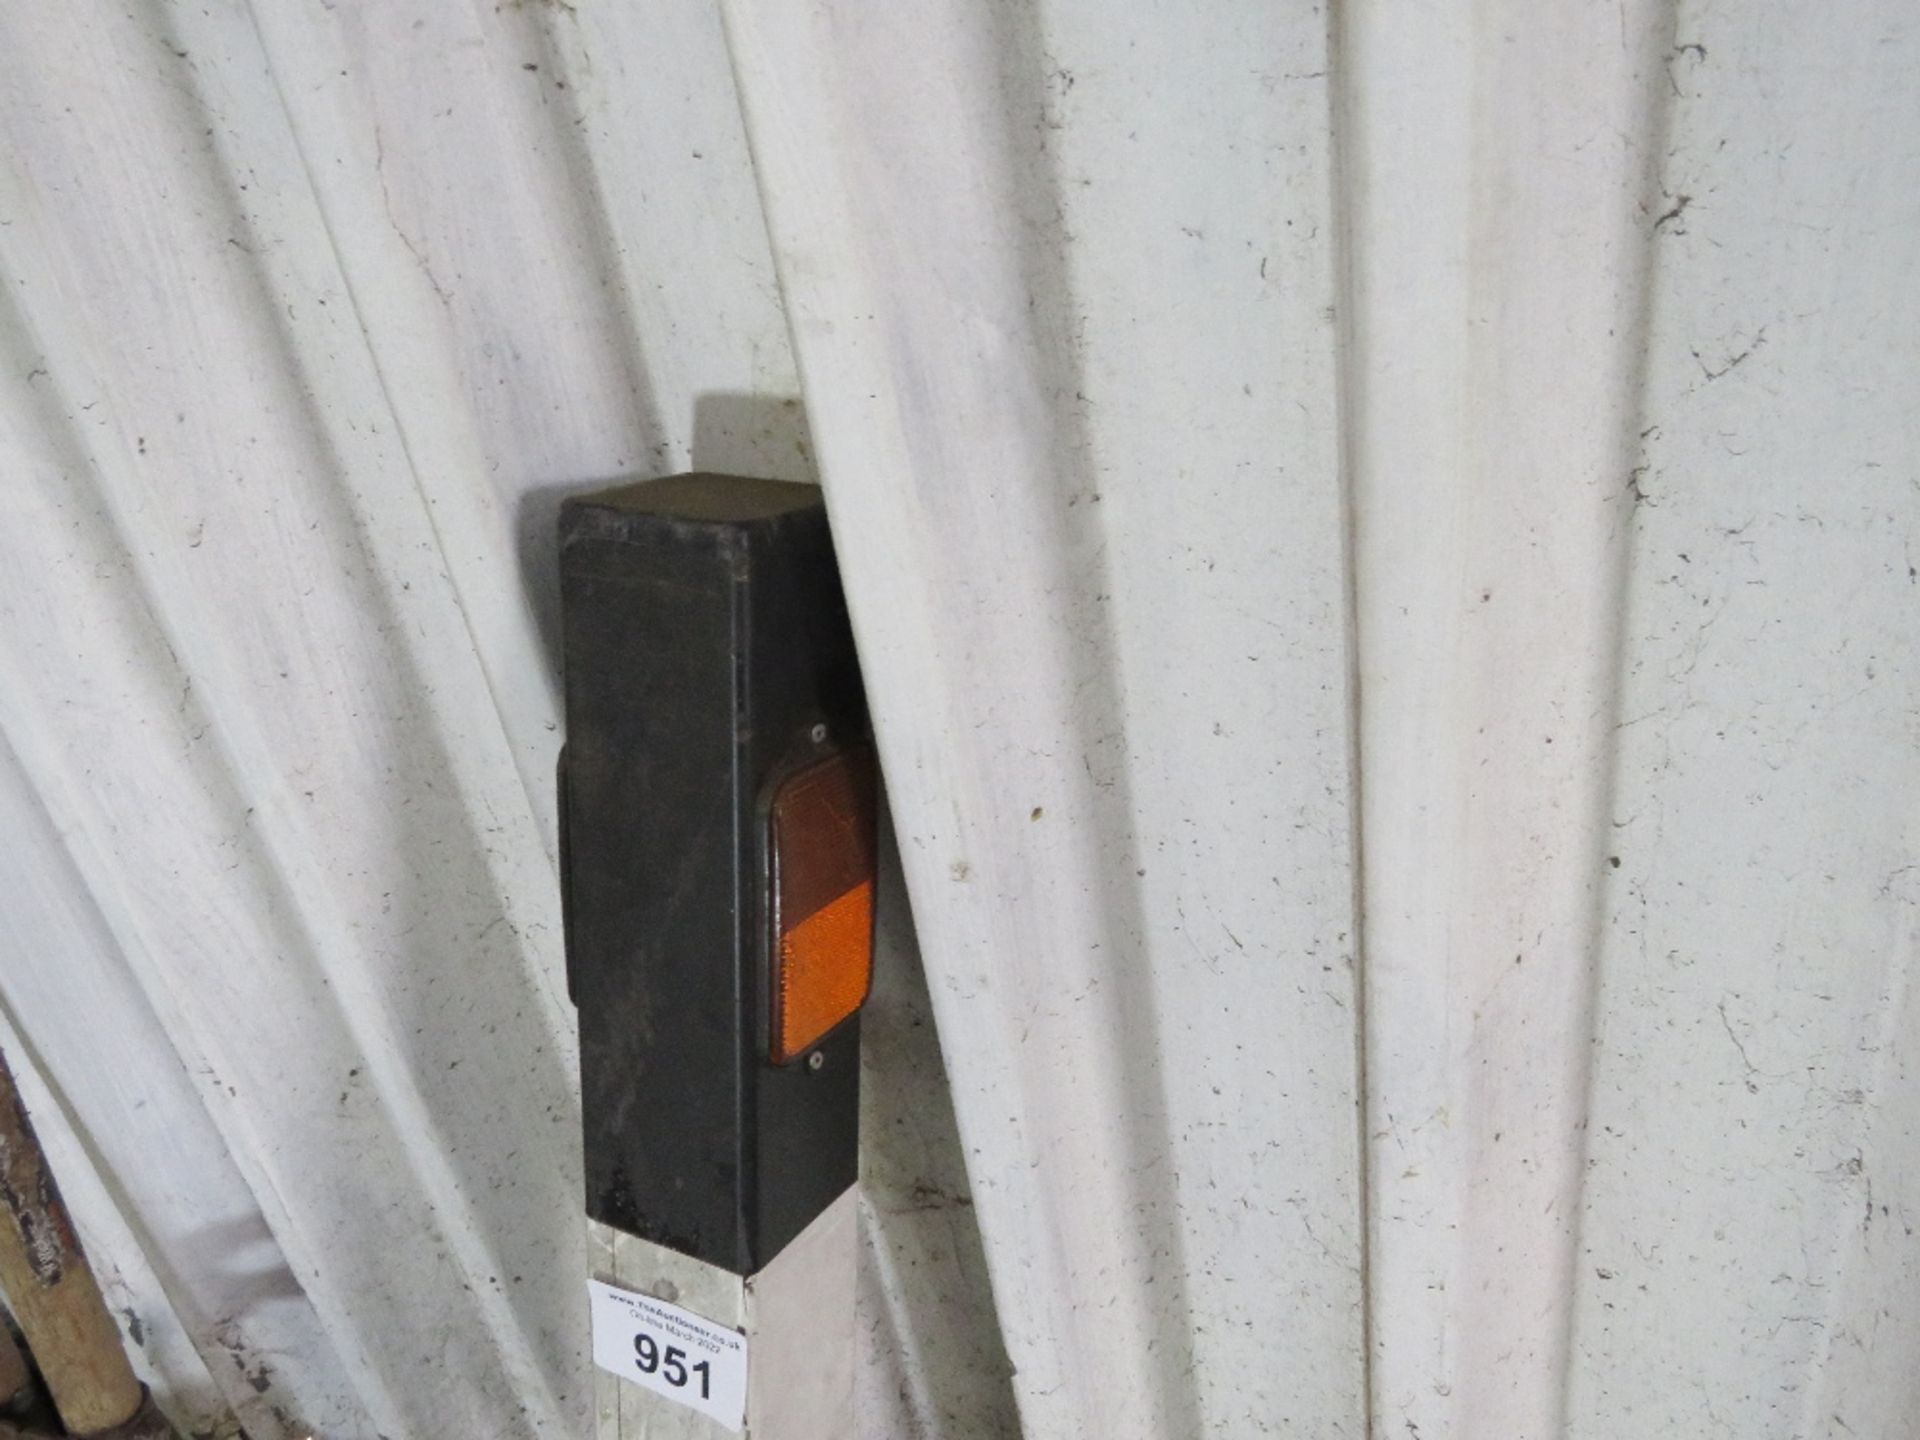 PULL OUT SECURITY POST, PADLOCK SECURED. SOURCED FROM DEPOT CLEARANCE. - Image 2 of 2